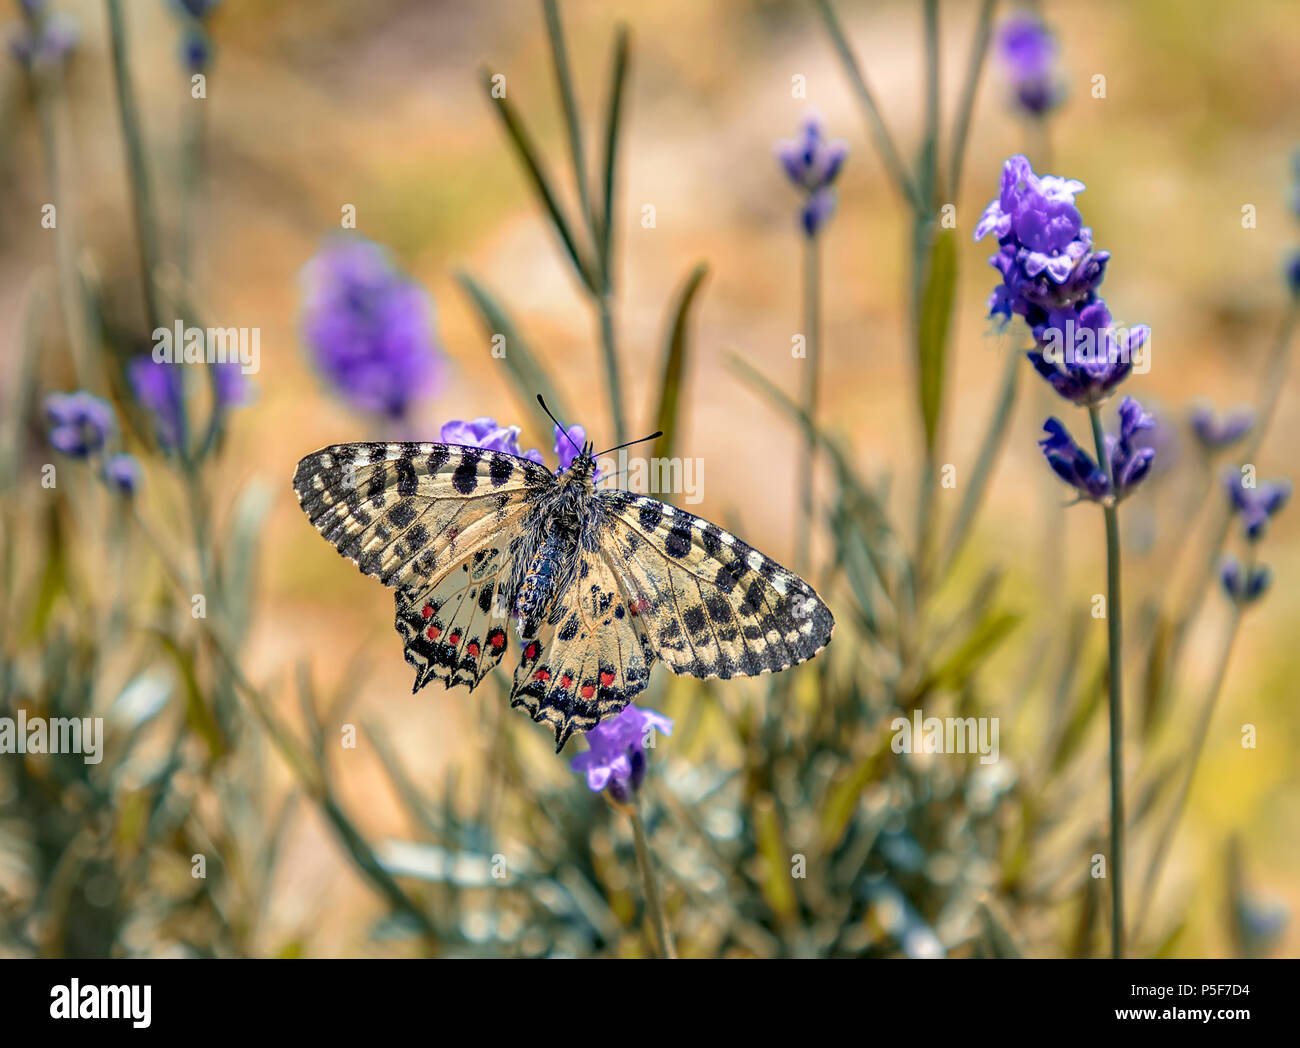 Amazing butterfly perched at the lavender flower, butterflies on a lavender flower Stock Photo